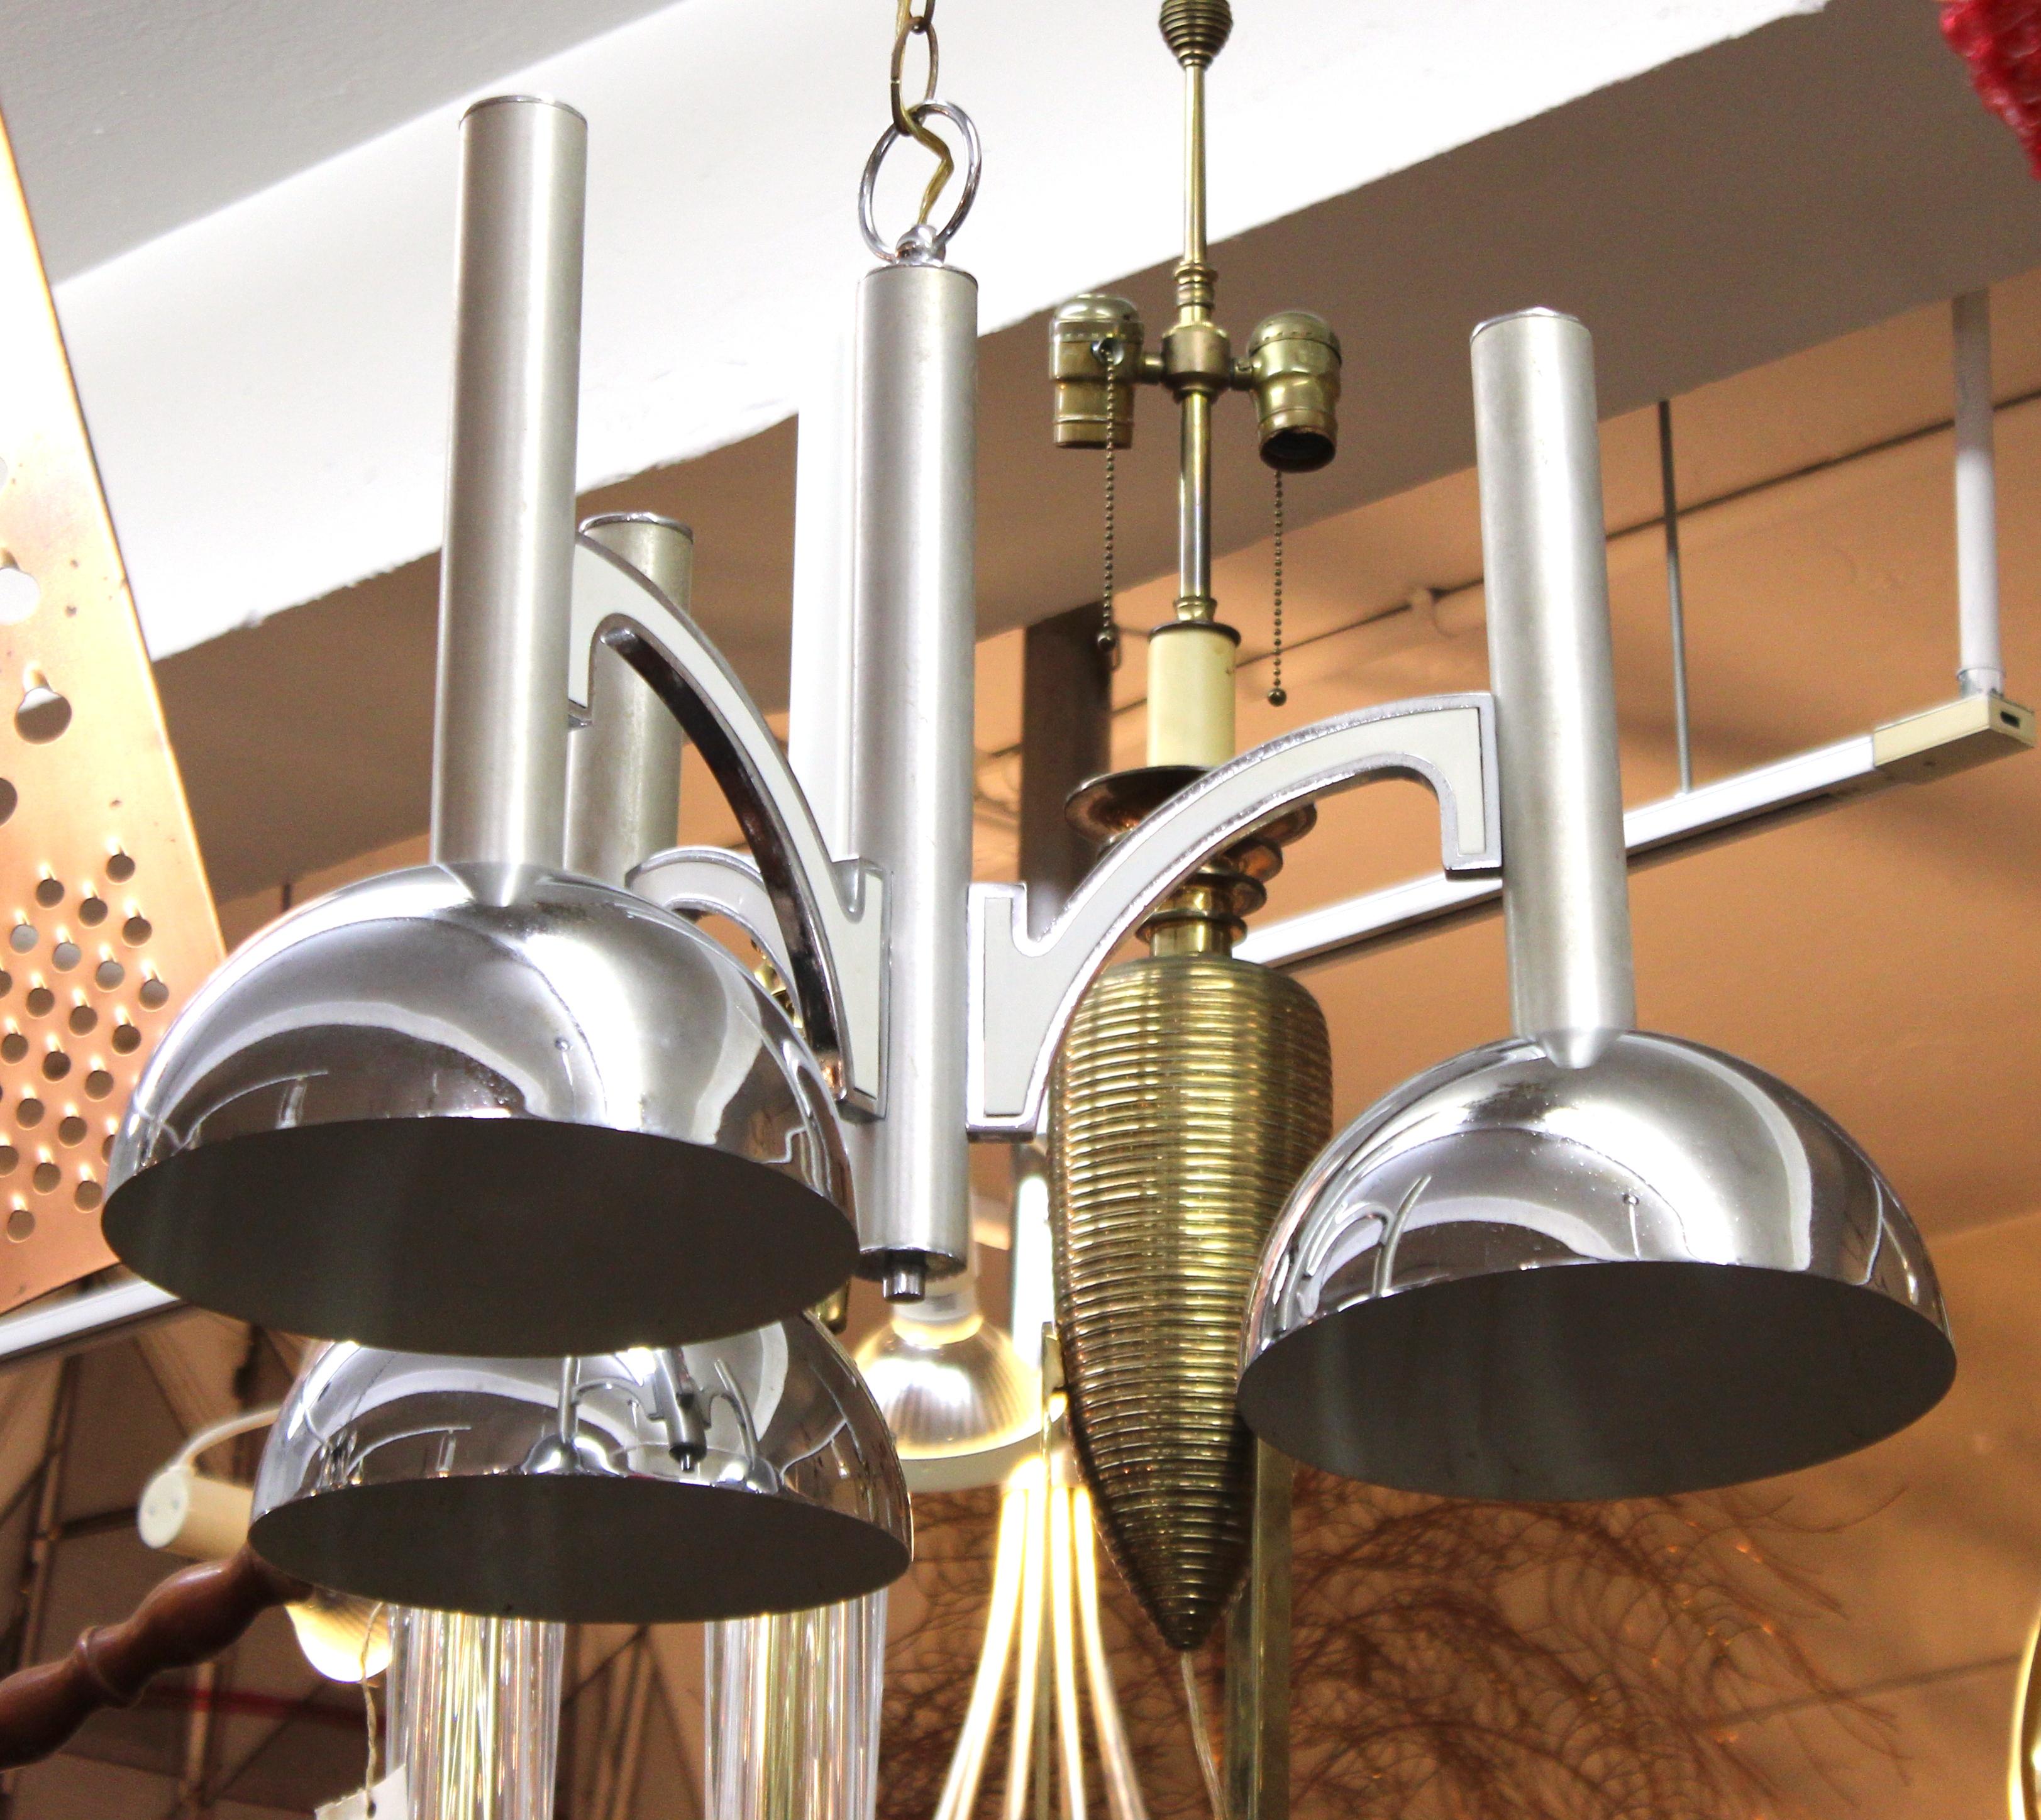 Mid-Century Modern ceiling pendant light made of metal with three shades around a center metal shaft. The piece has elements reminiscent of some machine age designs and was made in the mid-20th century. In great vintage condition with some